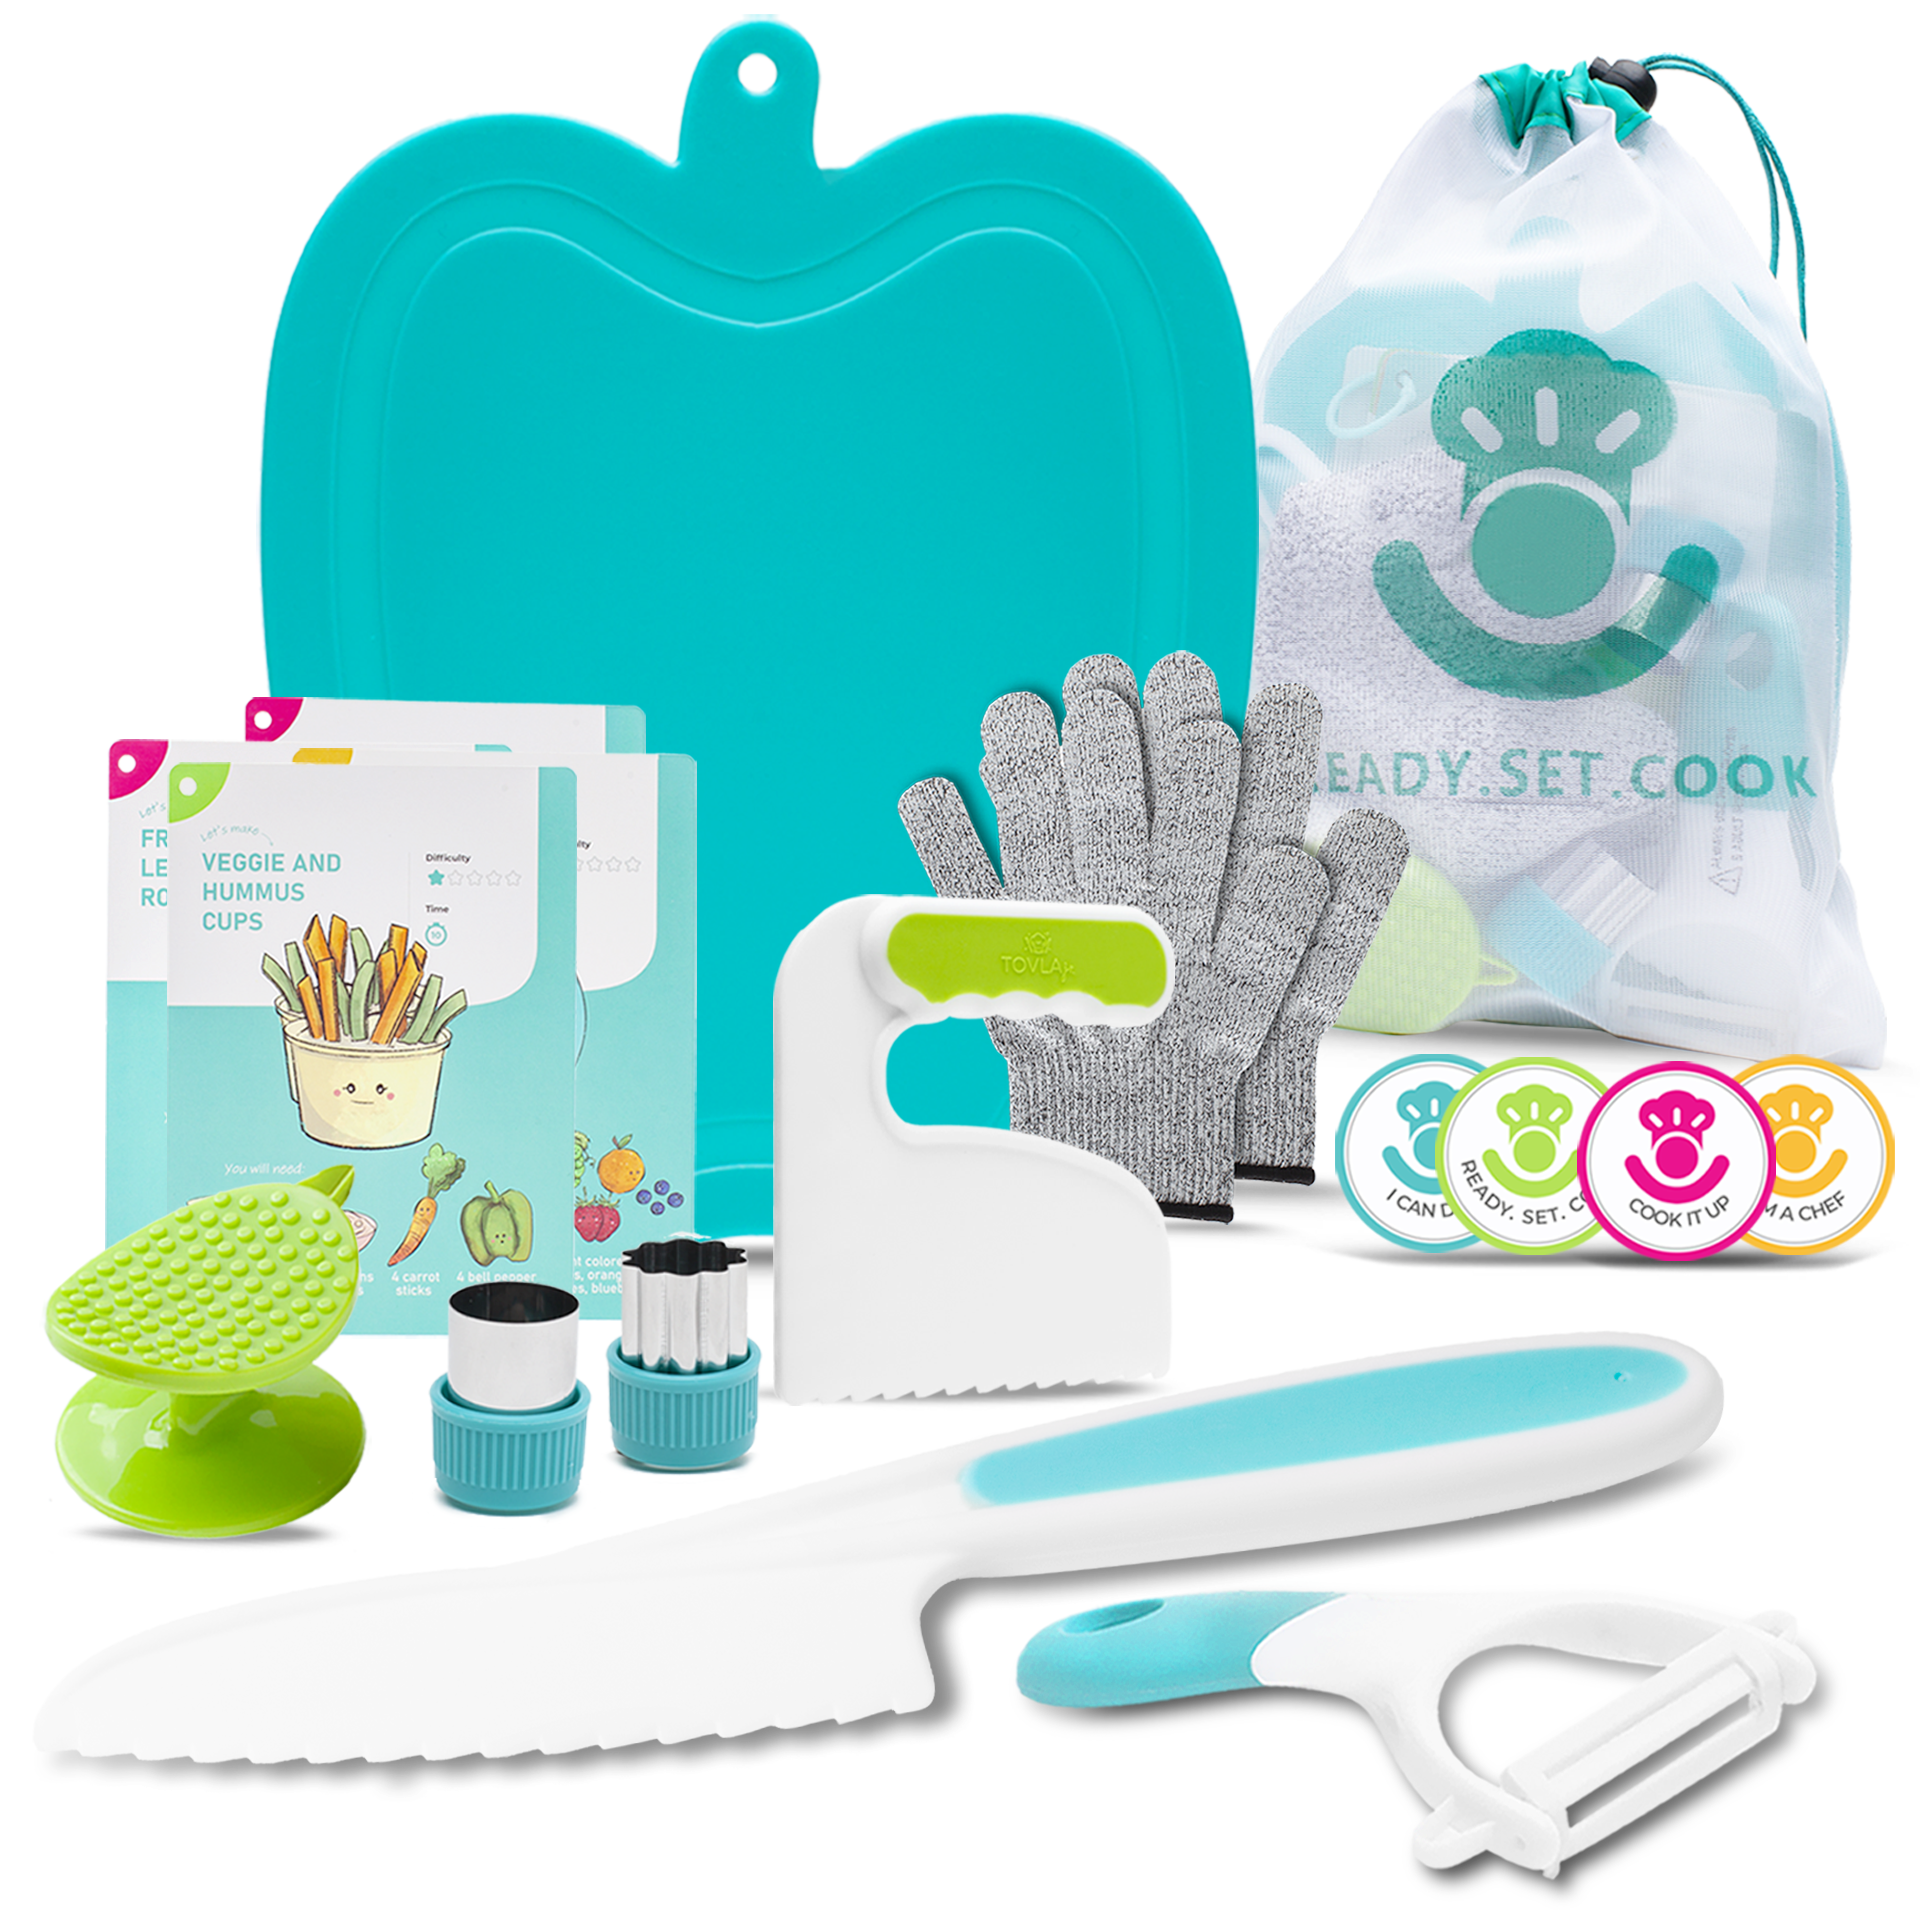 Tovla Jr. Kids Cooking and Baking Gift Set with Storage Case